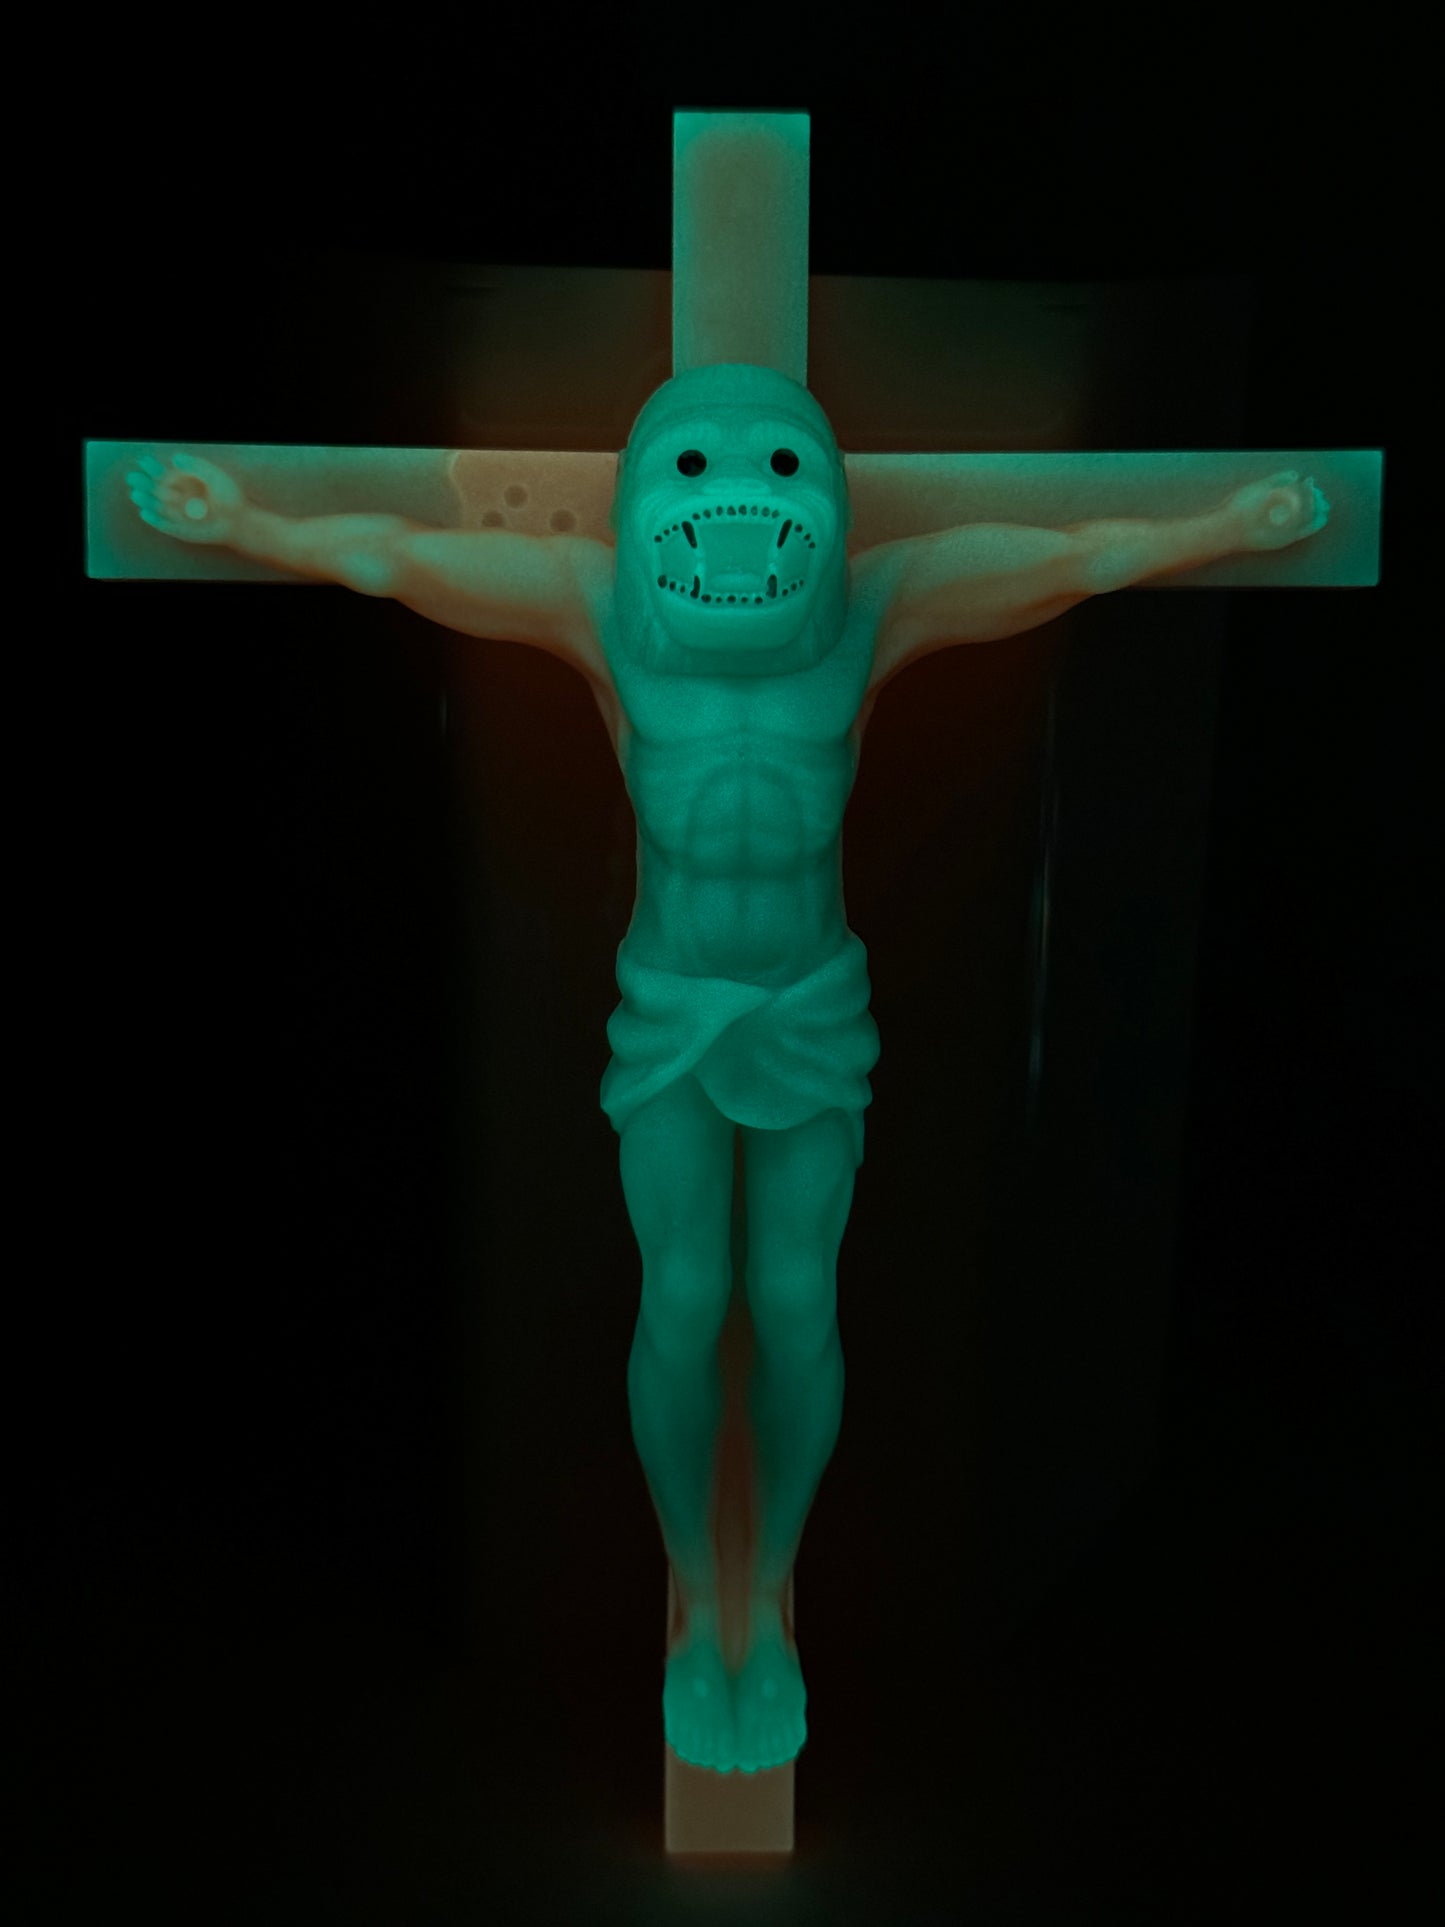 Christ on the Cross but he is an Ape, Magical Toy: Everlasting Peace